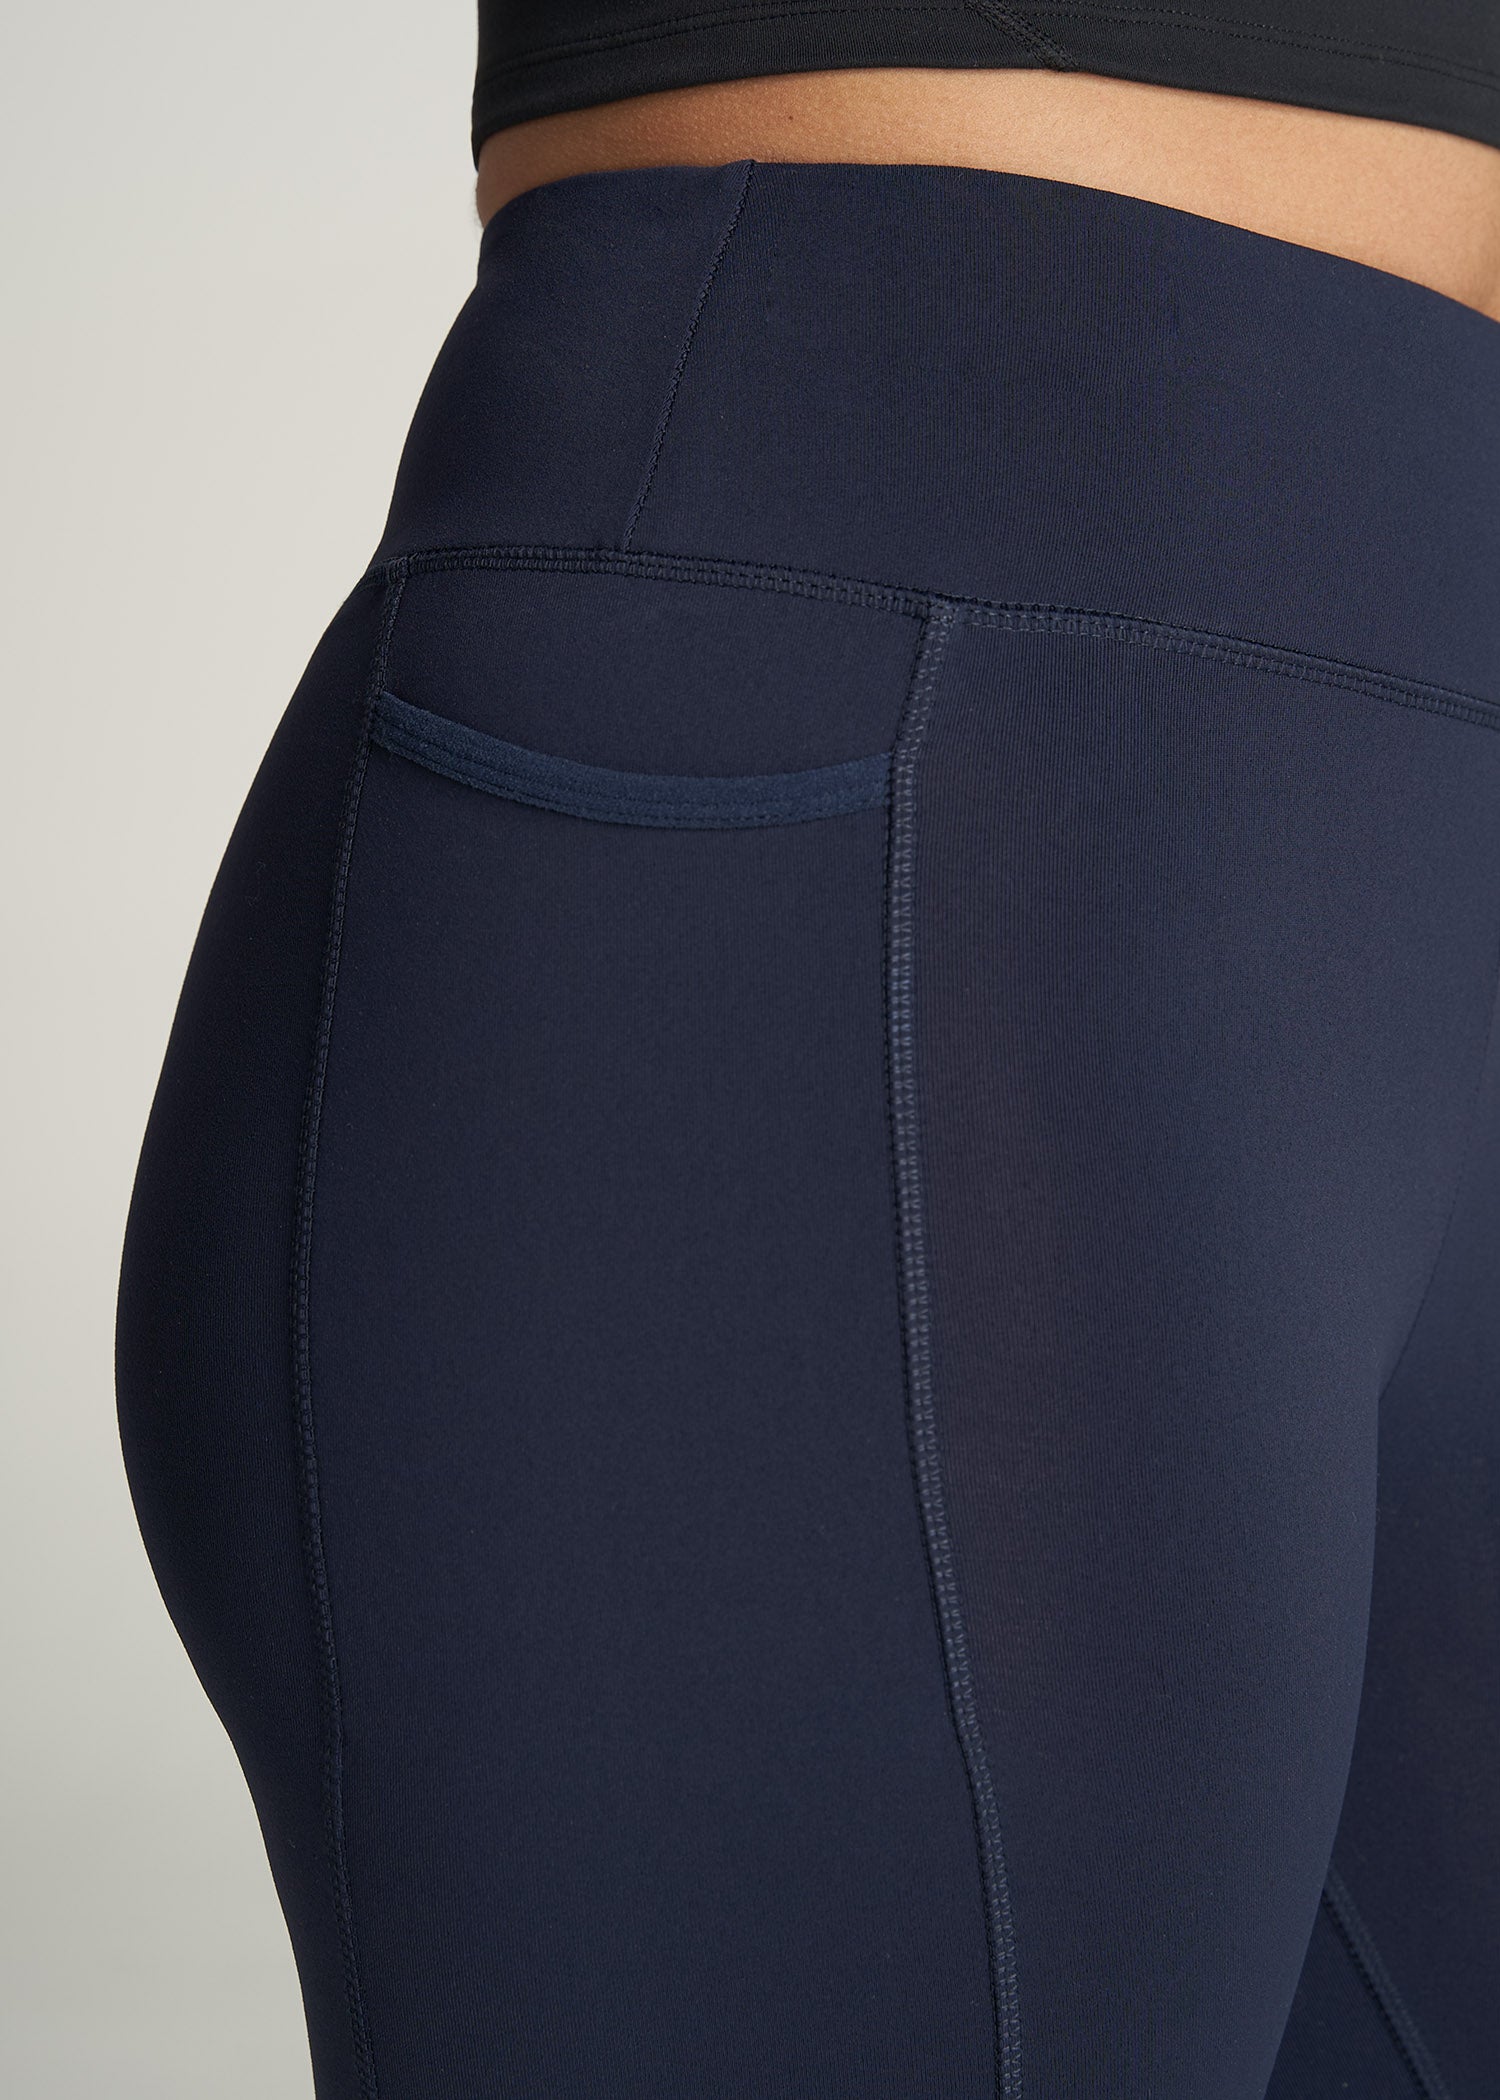 Women's High Waisted Workout Leggings with Inside Pockets - Navy Blue / XS